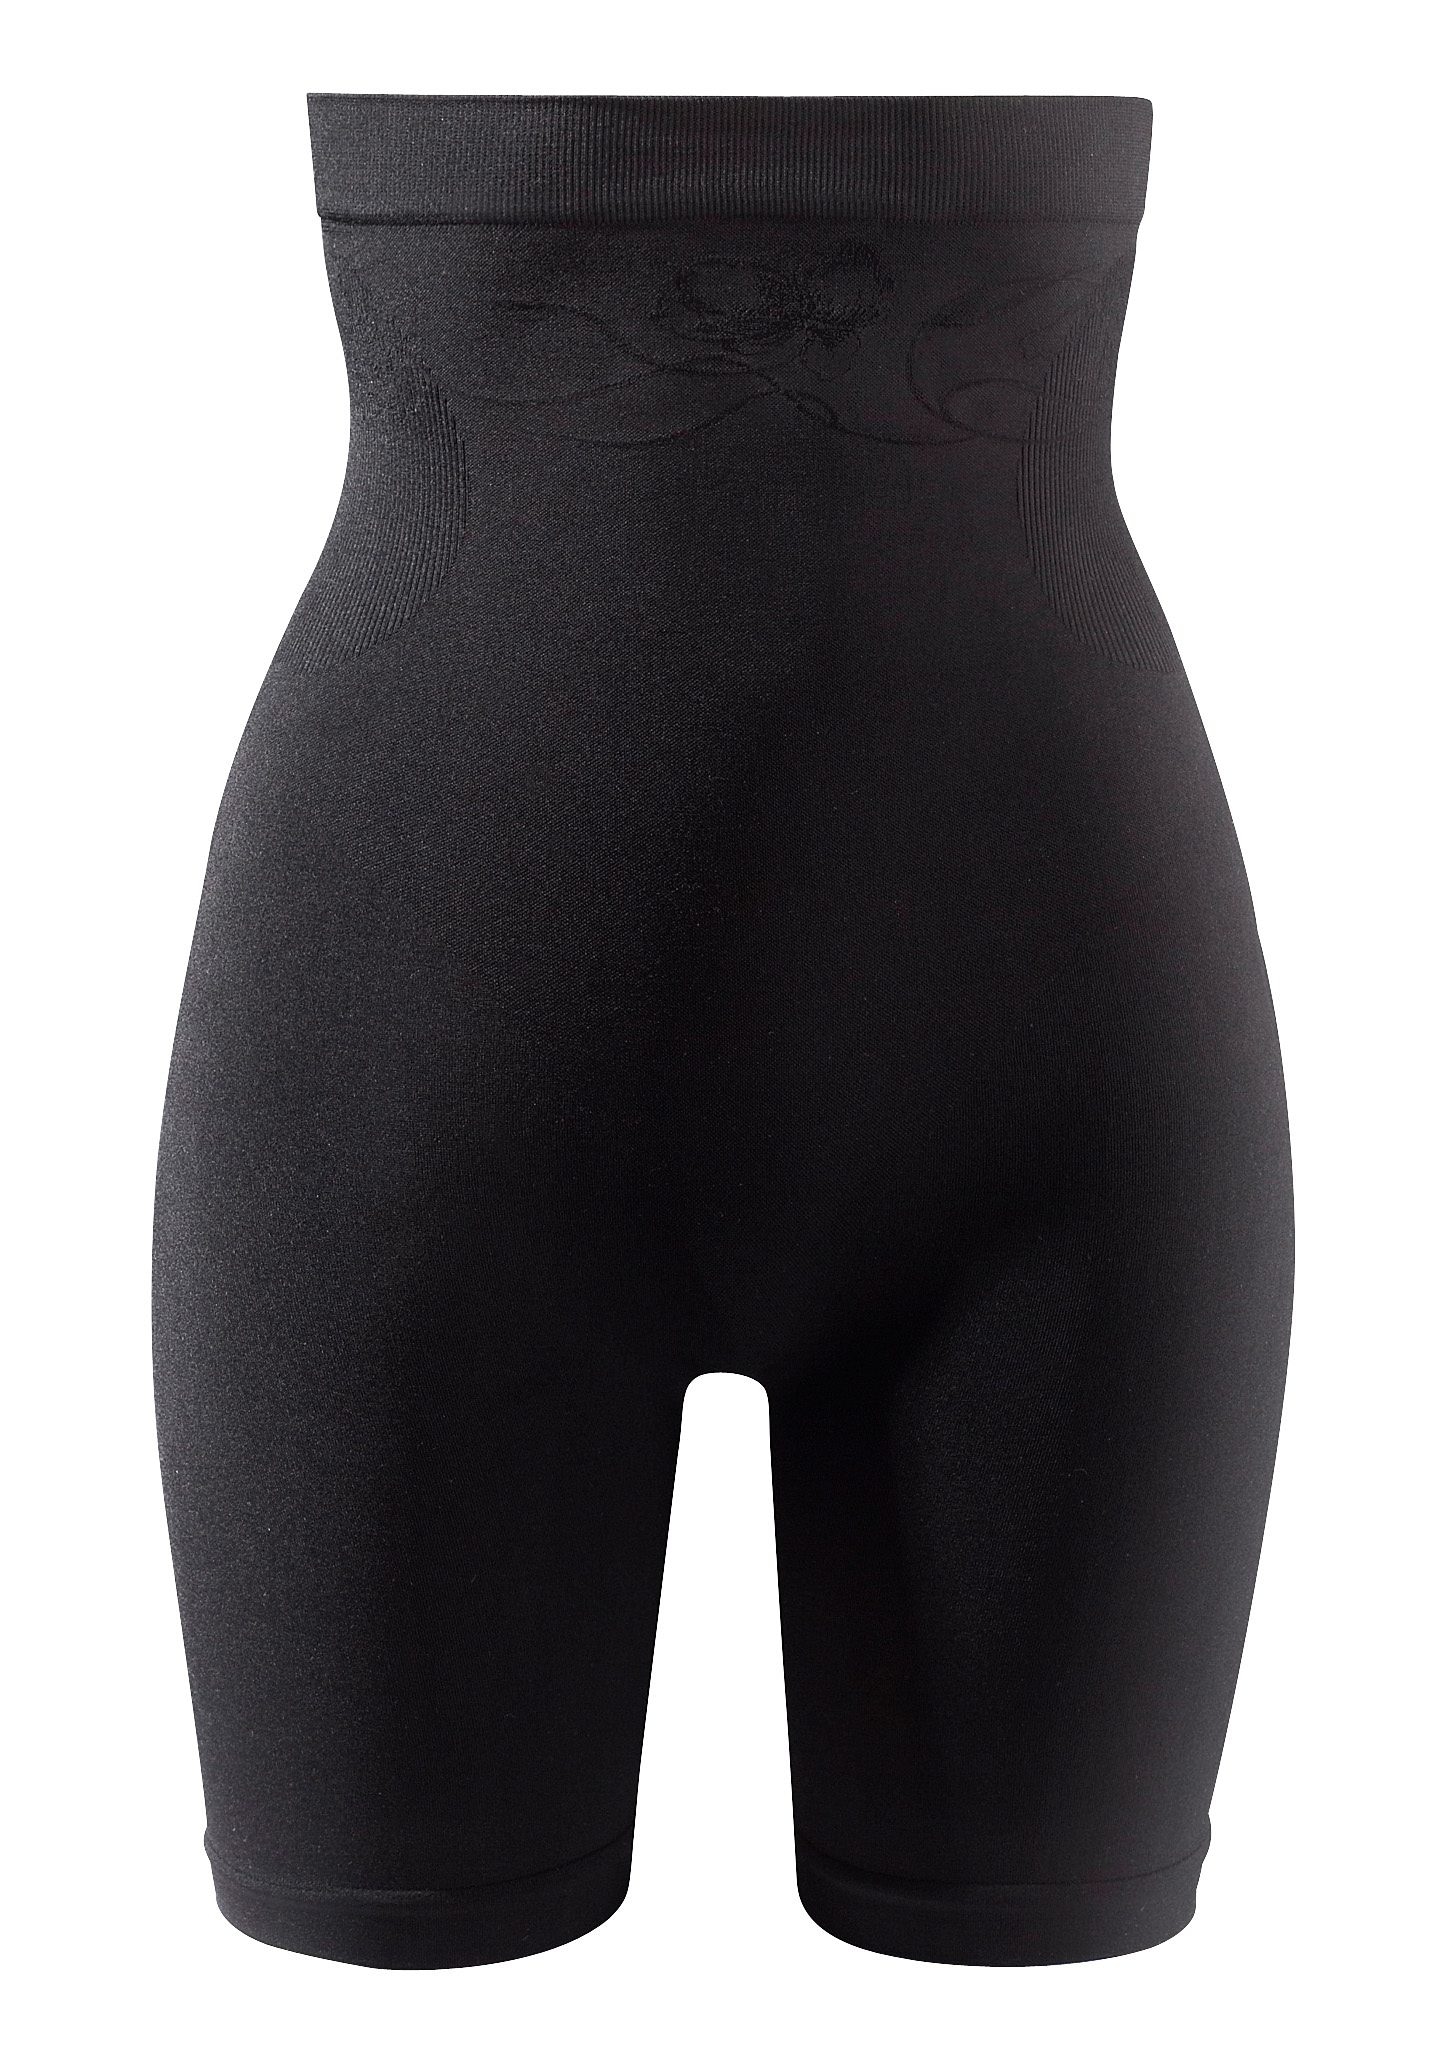 Commander SEAMLESS LASCANA Taille, Shapinghose, Basic hoher Dessous confortablement mit